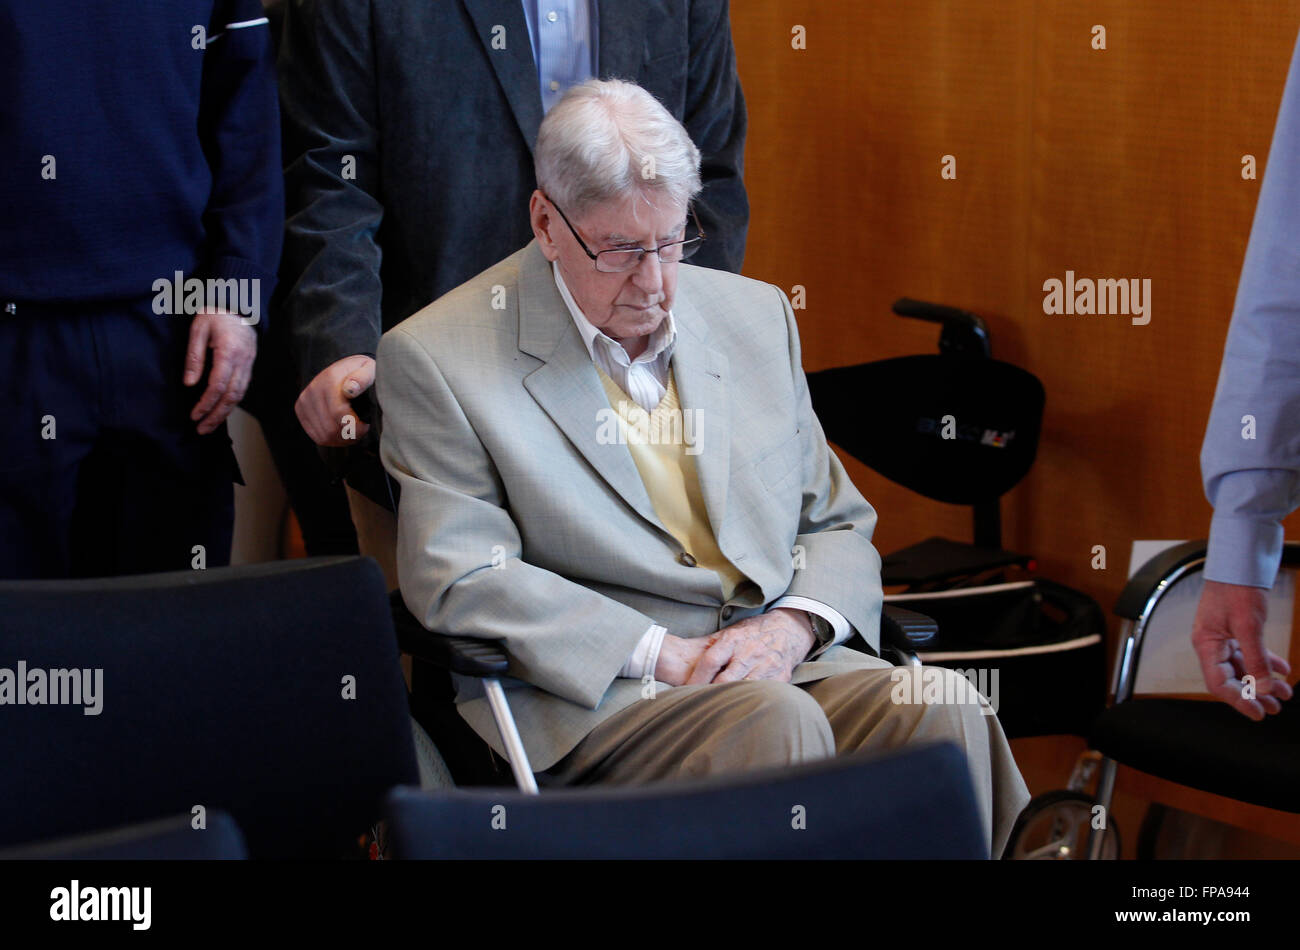 Detmold, Germany. 18th Mar, 2016. Defendant Reinhold Hanning arrives for the continuation of his trial in Detmold, Germany, 18 March 2016. Reinhold Hanning, a 94-year-old World War II SS guard is facing a charge of being an accessory to at least 170,000 murders at Auschwitz concentration camp. Prosecutors state that he was a member of the SS 'Totenkopf' (Death's Head) Division and that he was stationed at the Nazi regime's death camp between early 1943 and June 1944. Photo: Ina Fassbender/dpa/Alamy Live News Stock Photo